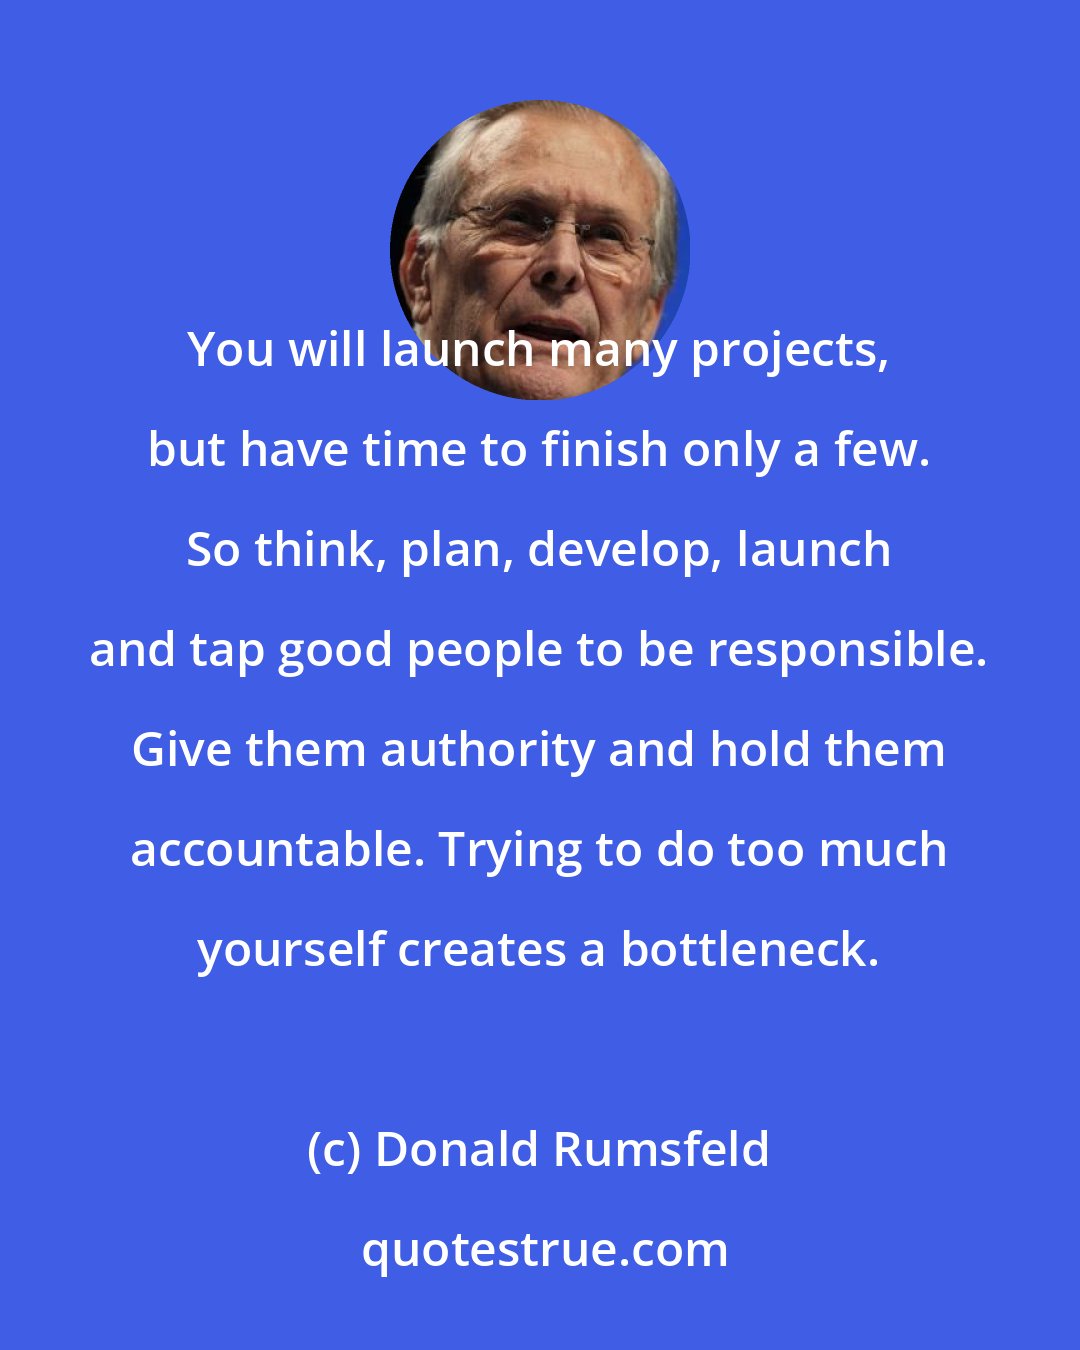 Donald Rumsfeld: You will launch many projects, but have time to finish only a few. So think, plan, develop, launch and tap good people to be responsible. Give them authority and hold them accountable. Trying to do too much yourself creates a bottleneck.